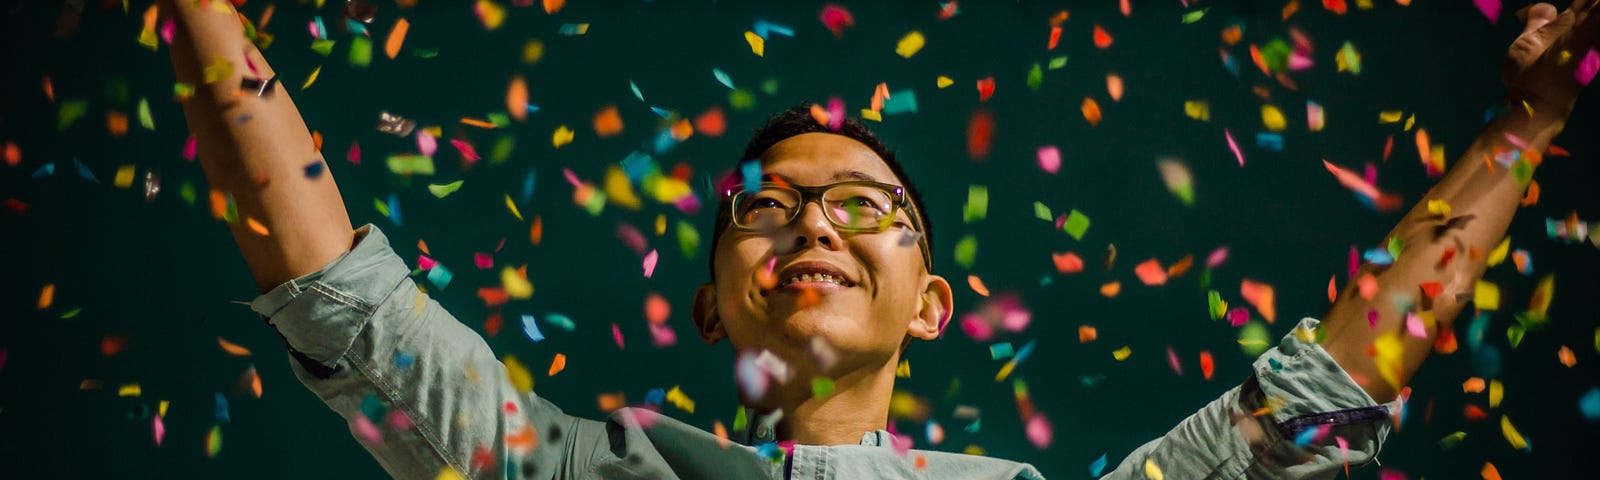 Man looking happy and celebrating with confetti falling around him.